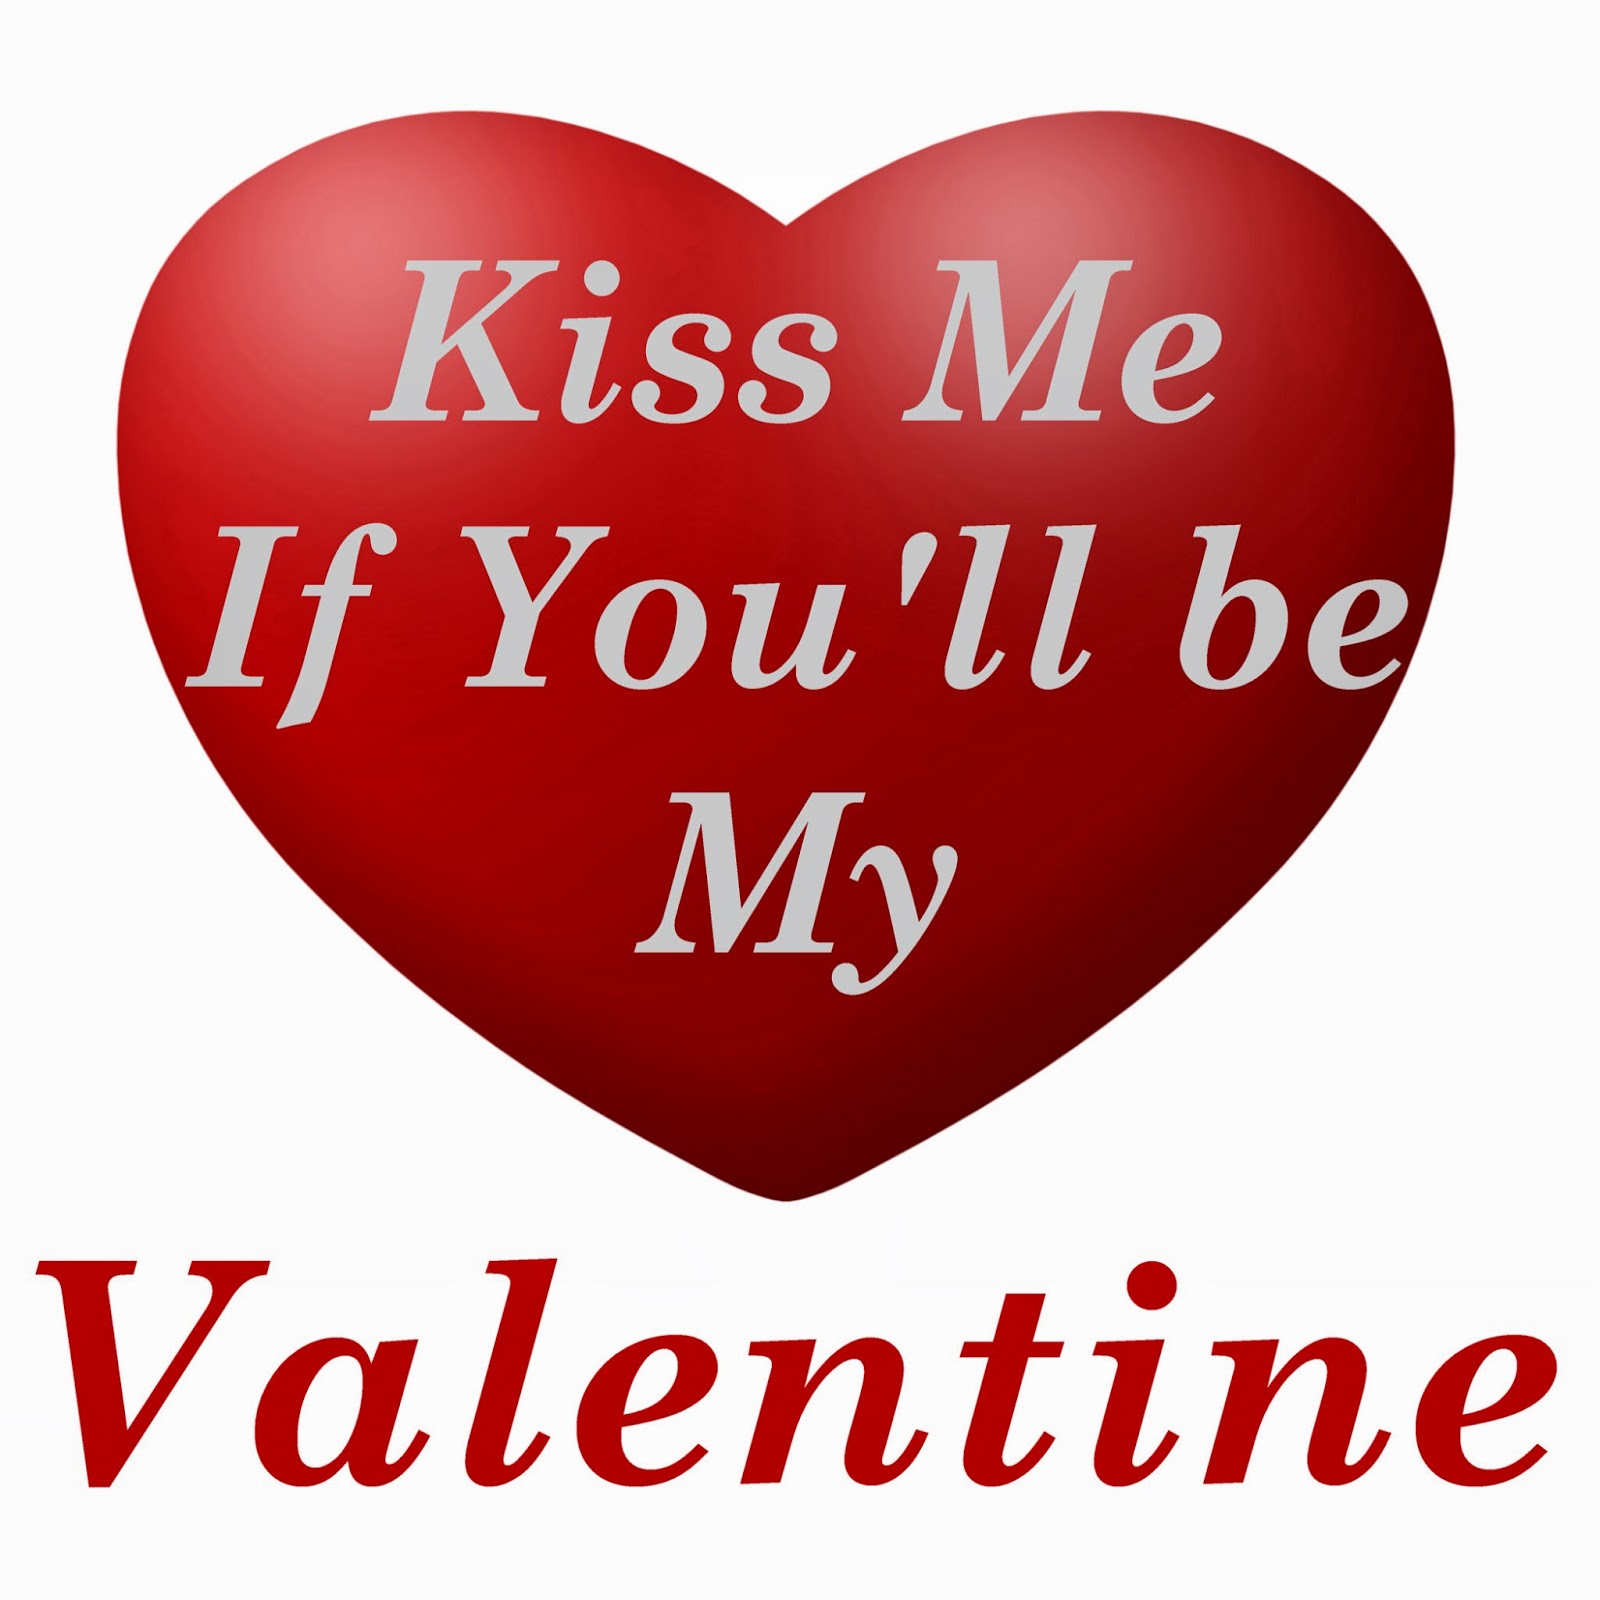 Valentines Day Greeting Cards Free Download - Valentine's Day Greeting Cards Free Download - HD Wallpaper 